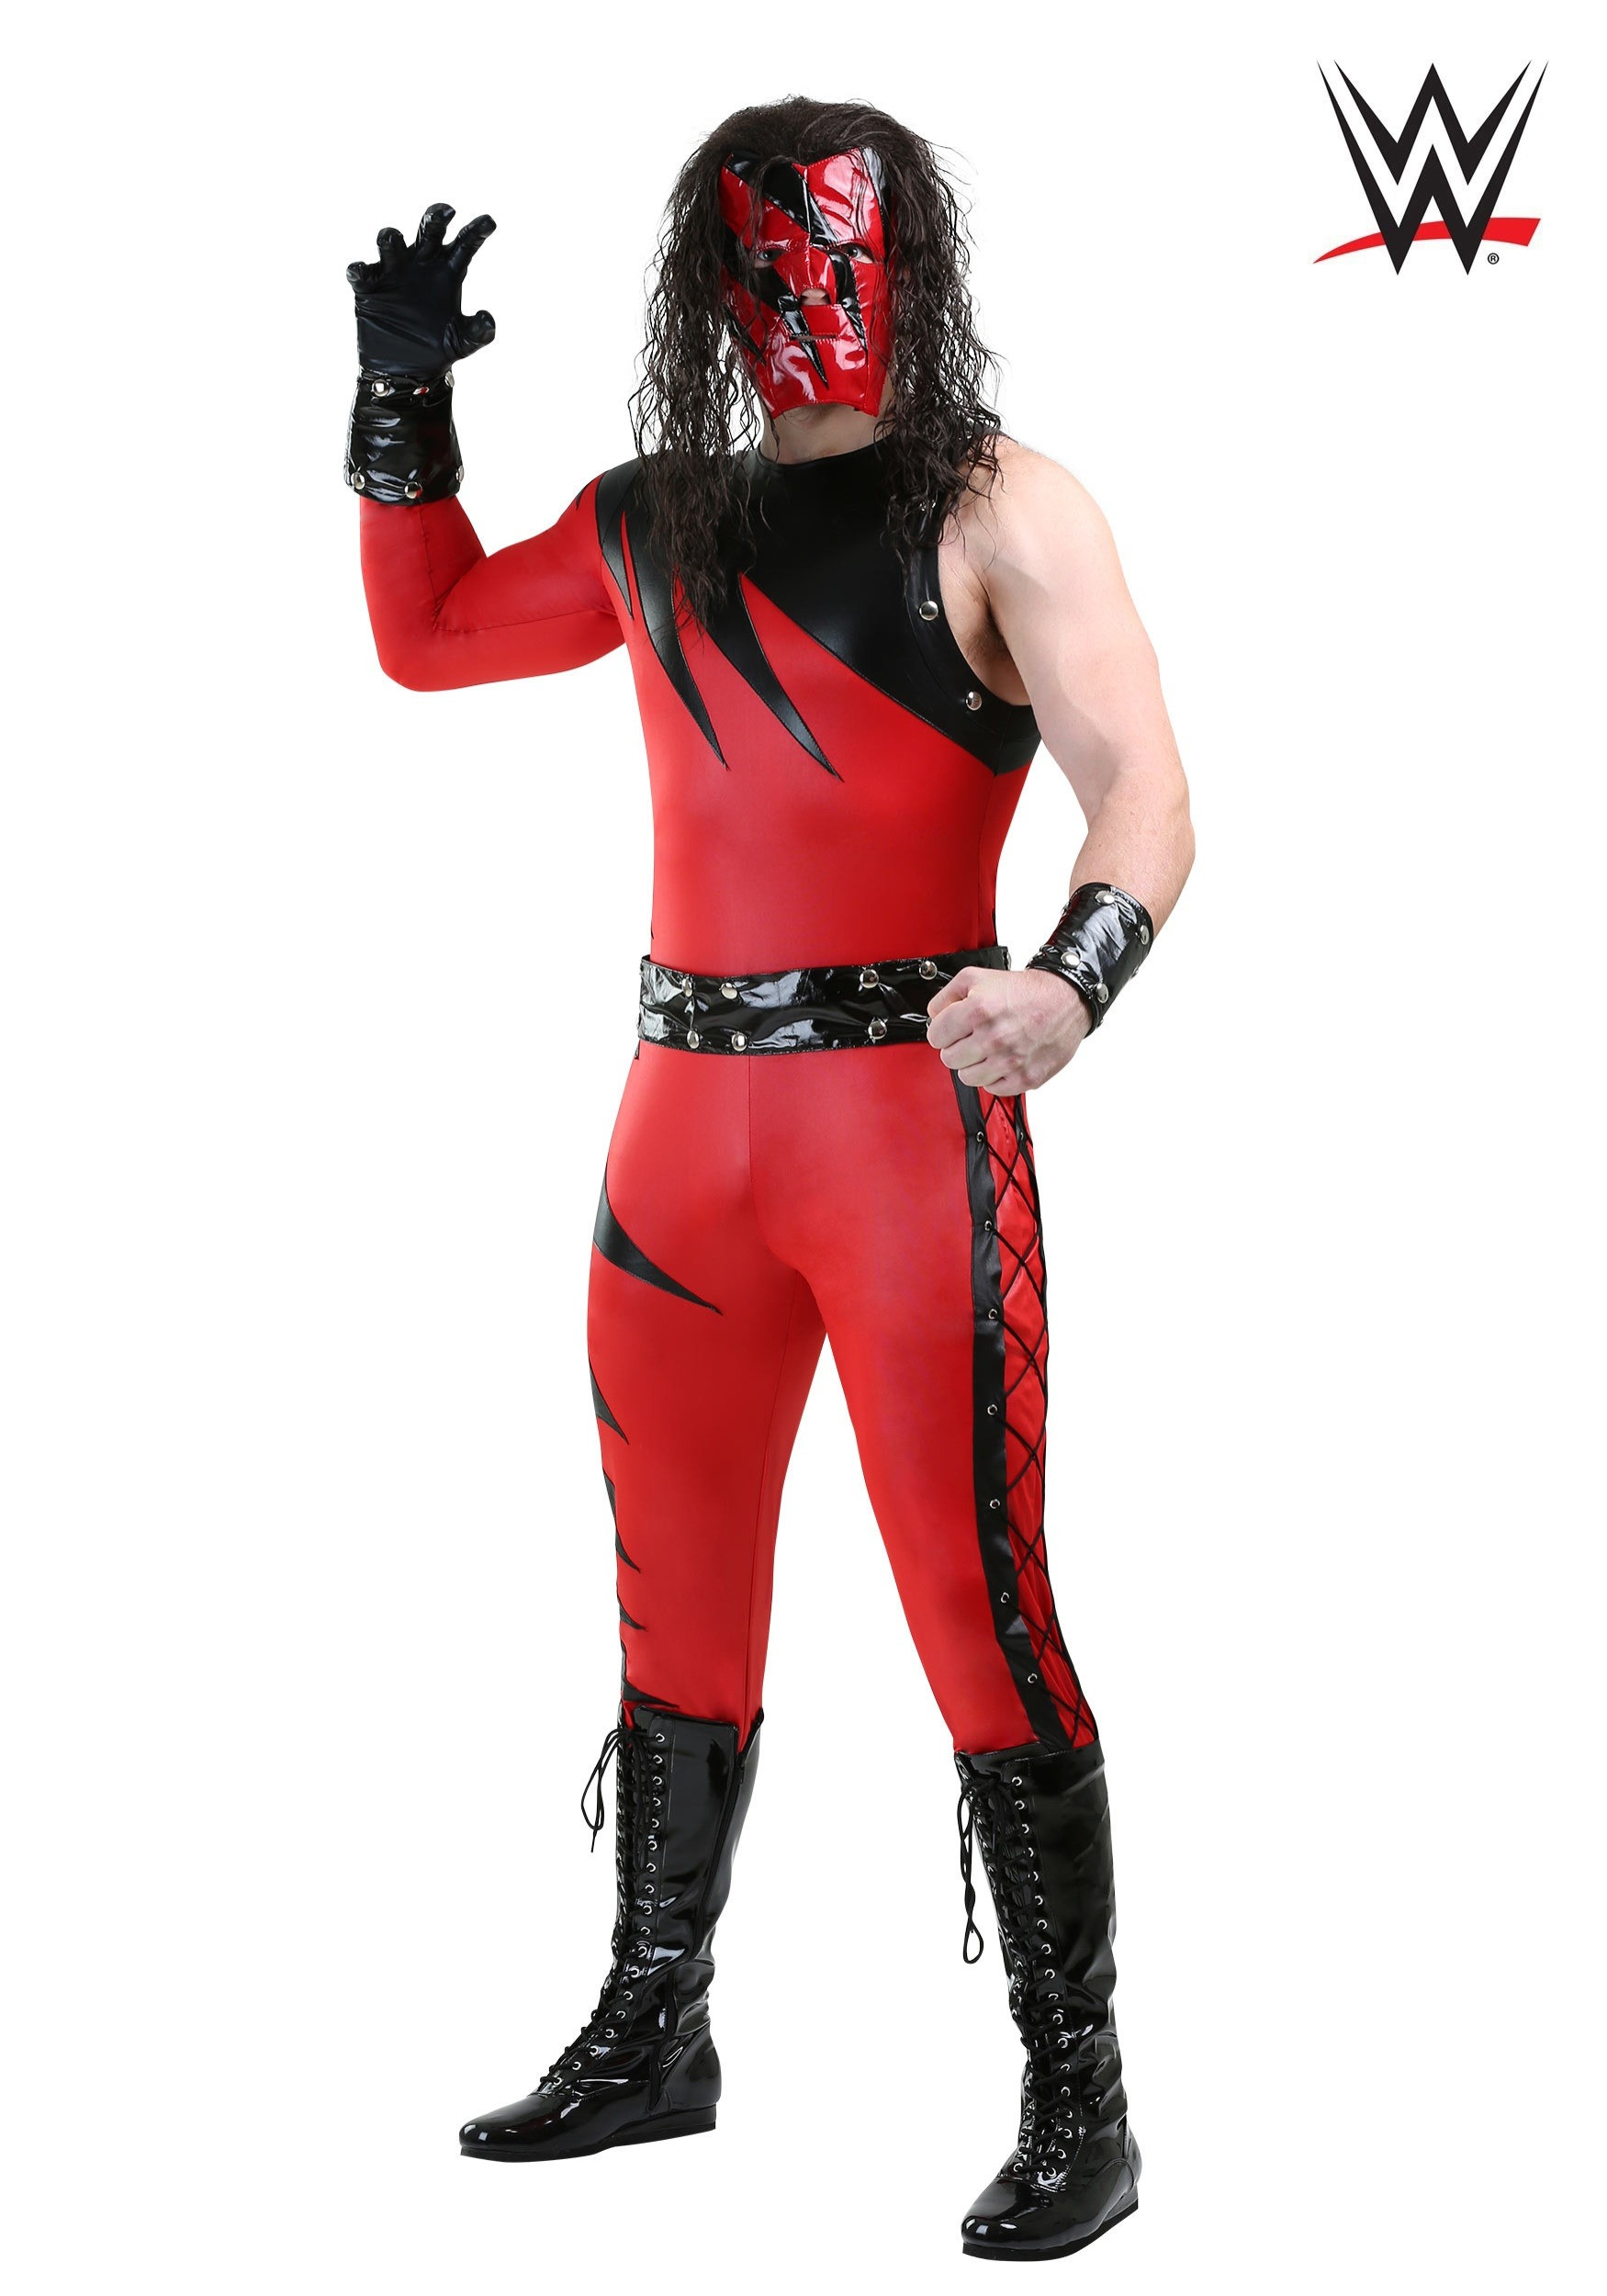 Stone Cold Halloween Costume
 Get Ready to Rumble with WWE Costumes from